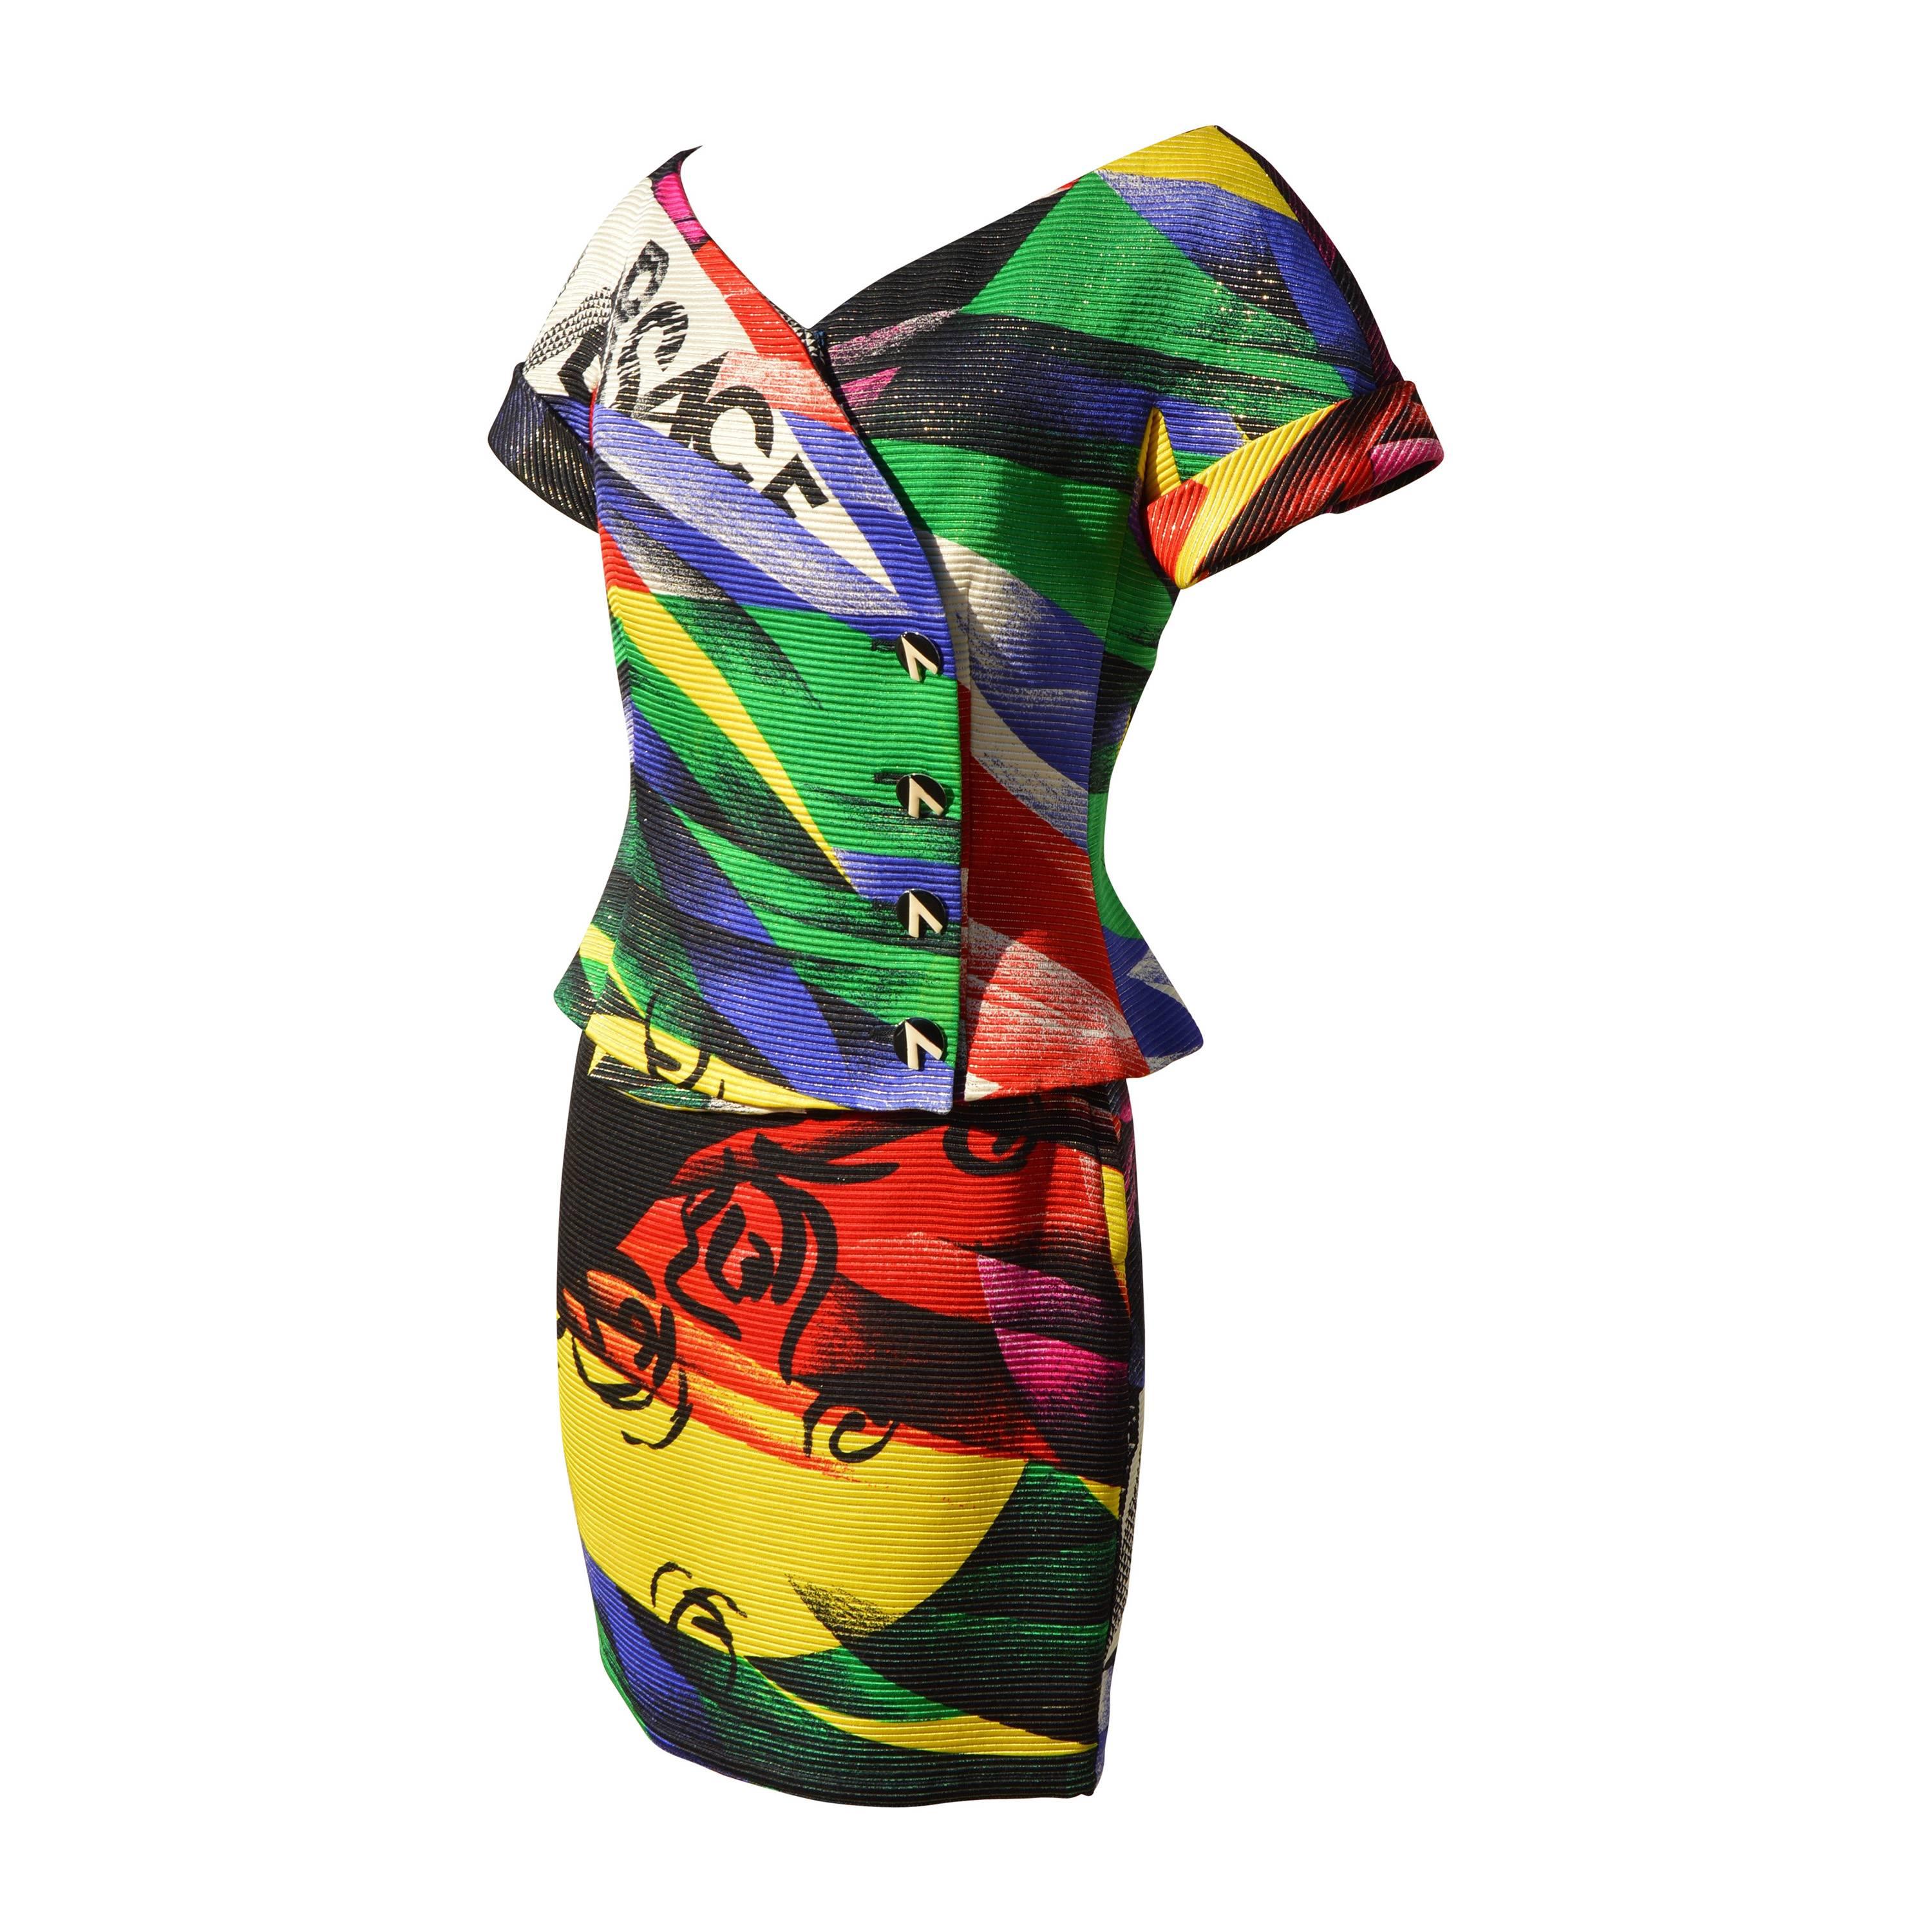 With this really hard to find 'Versace Graffiti' skirt suit motif with colors inspired by the famous 19th century painter Marc Chagall you have a timeless proof of the glamorous cut of Mr Gianni Versace and his incredible right taste with his